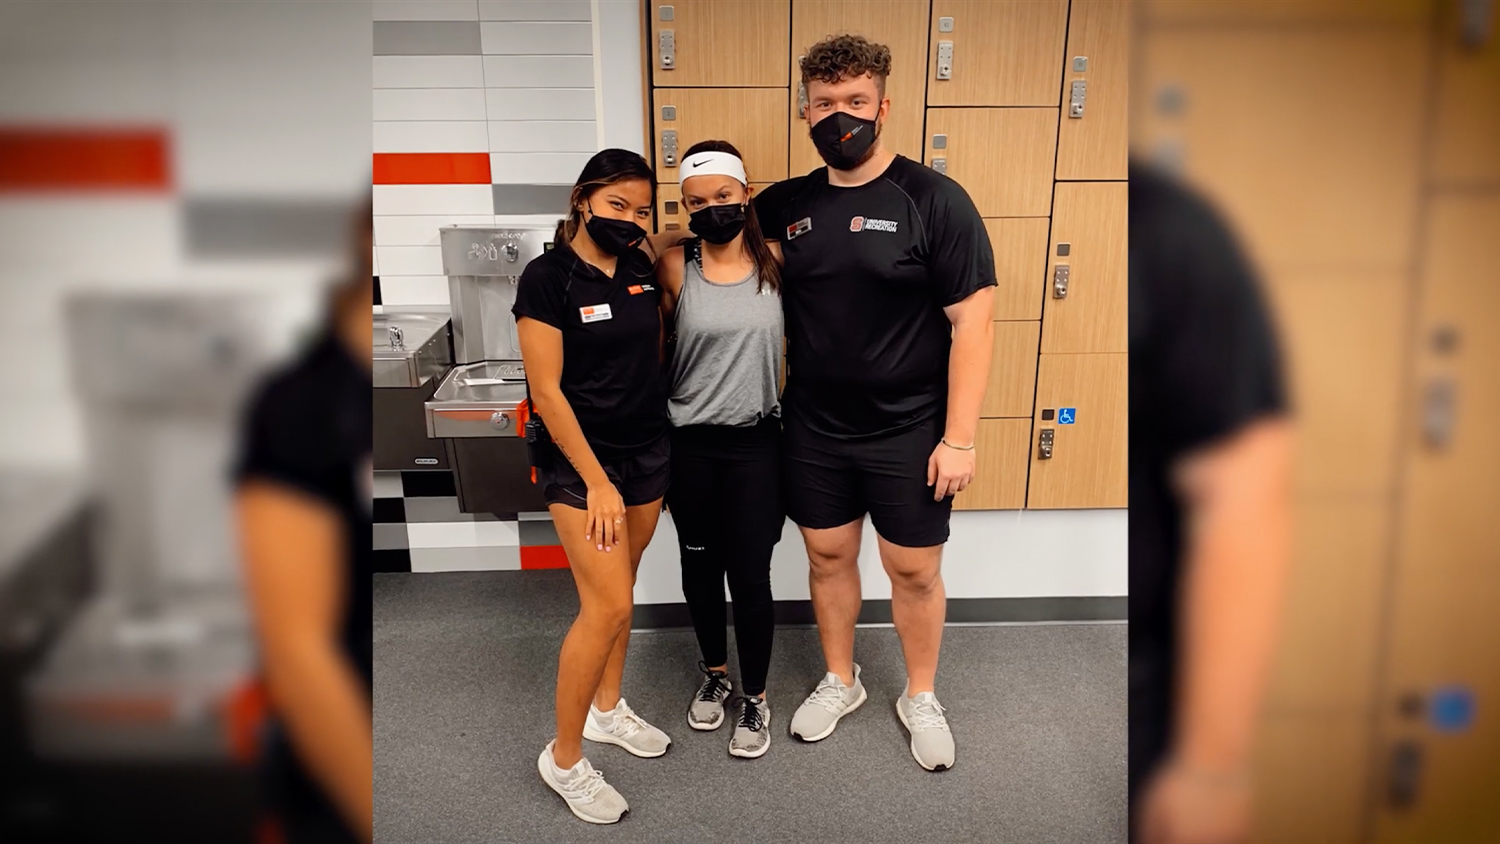 Three students wearing masks and gym clothing